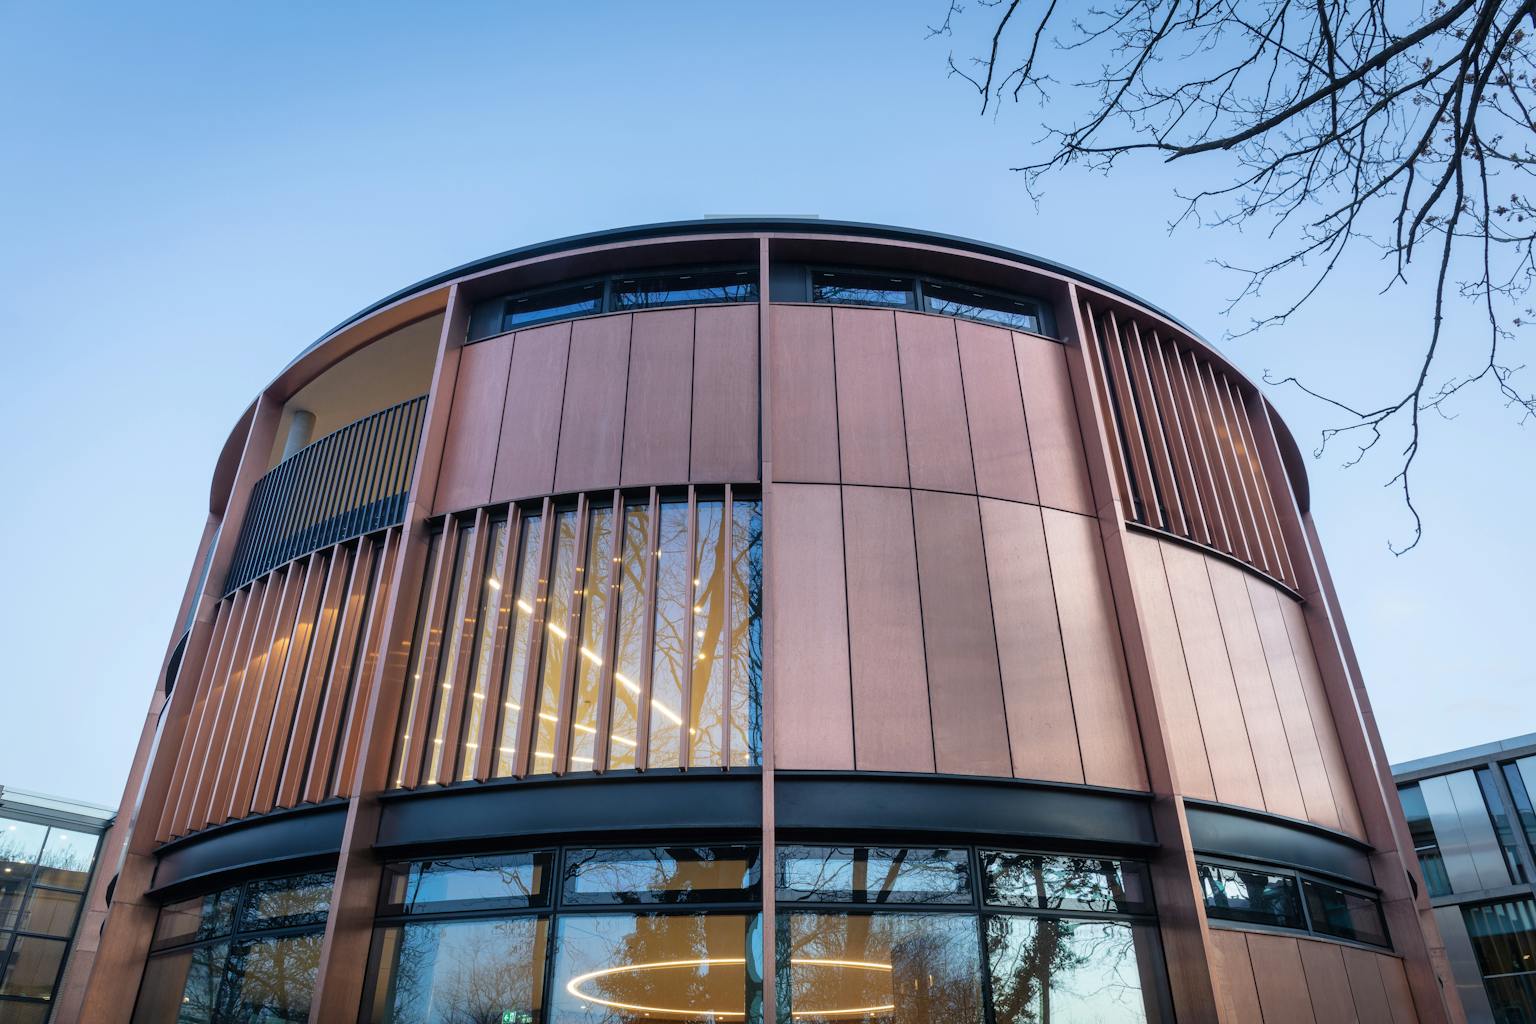 The new, Purcell-designed graduate centre at St Catherine's College, Oxford, UK